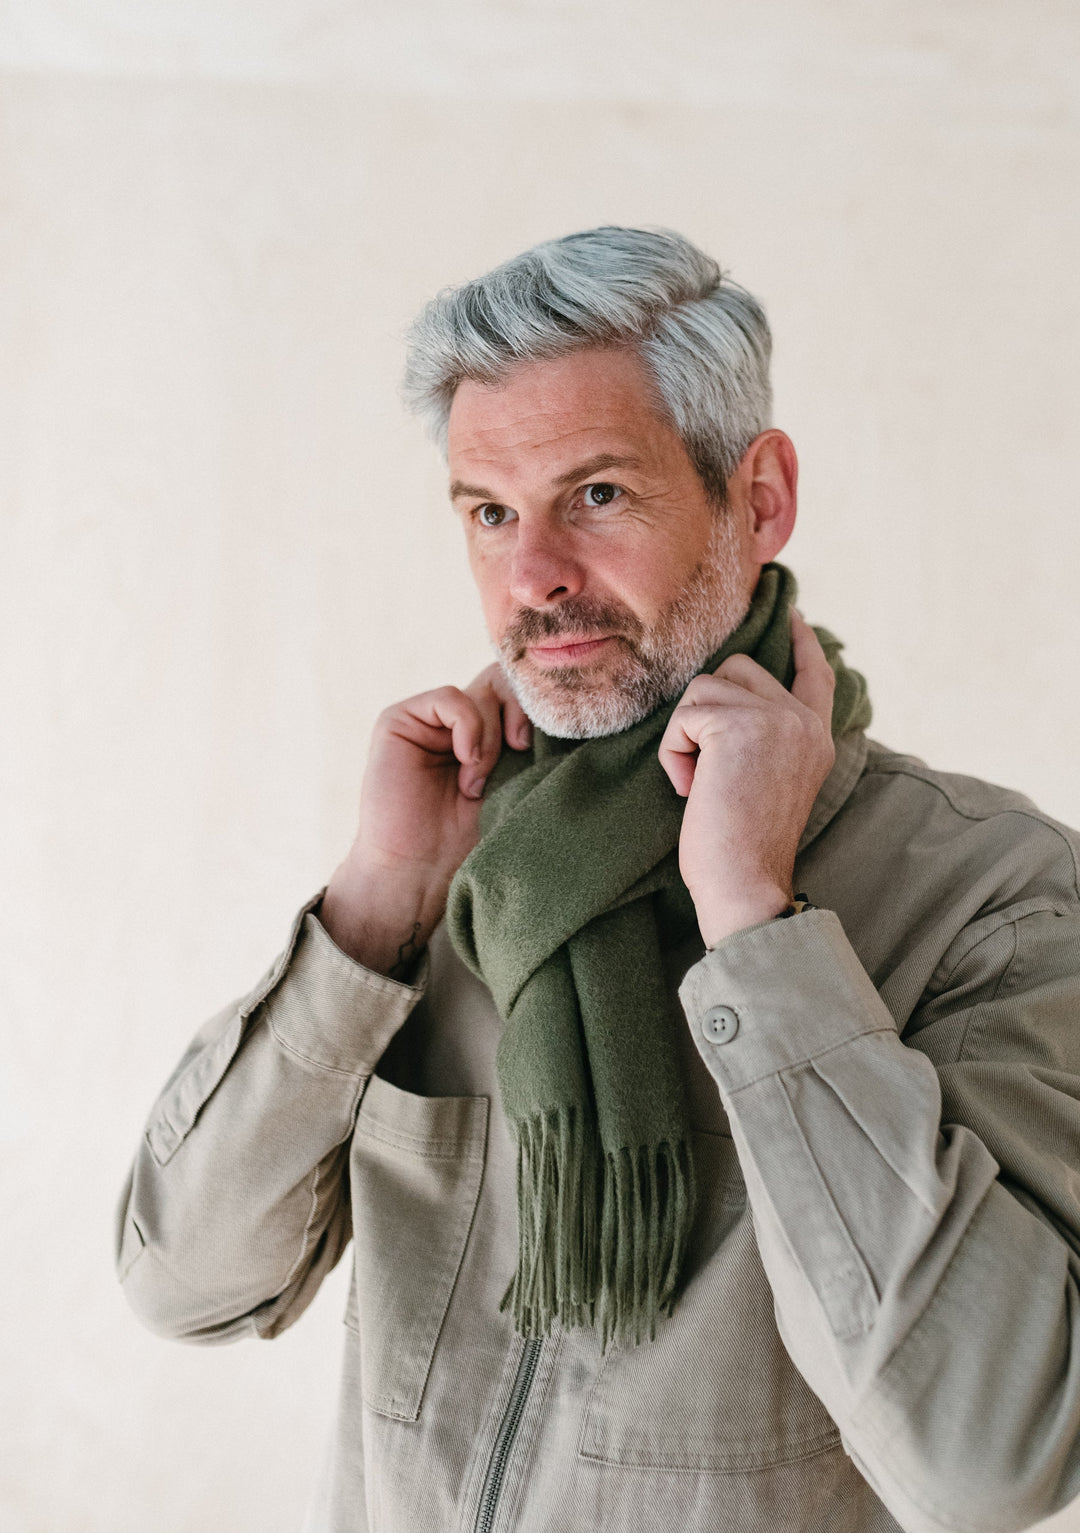 Men's Lambswool Scarf in Olive